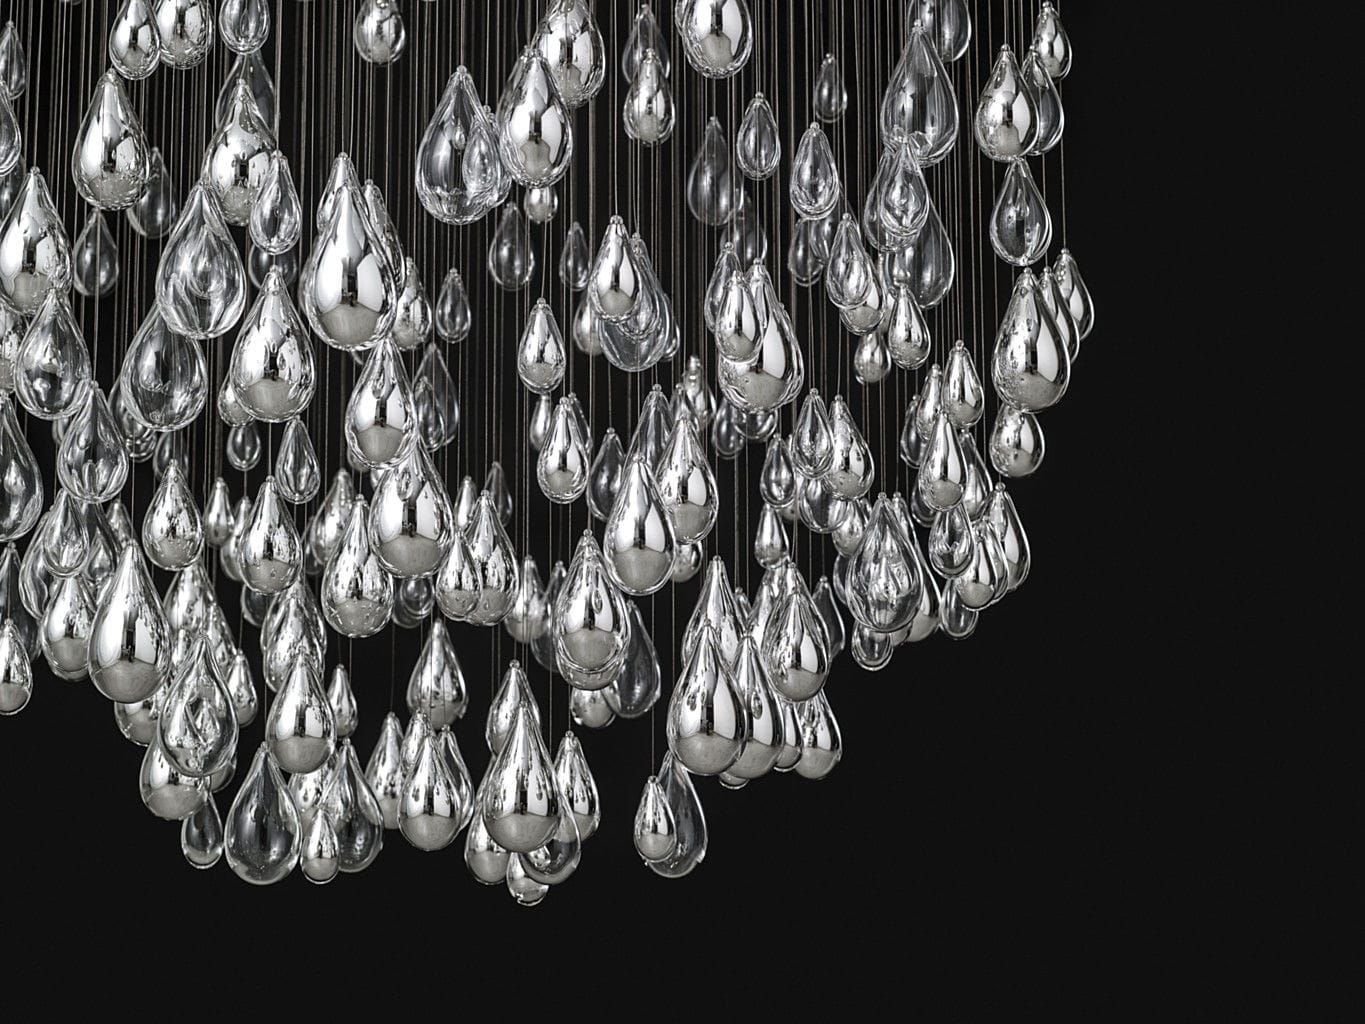 Contemporary Chandelier Blown Glass Stainless Steel Led Intended For Glass Droplet Chandelier (View 12 of 15)